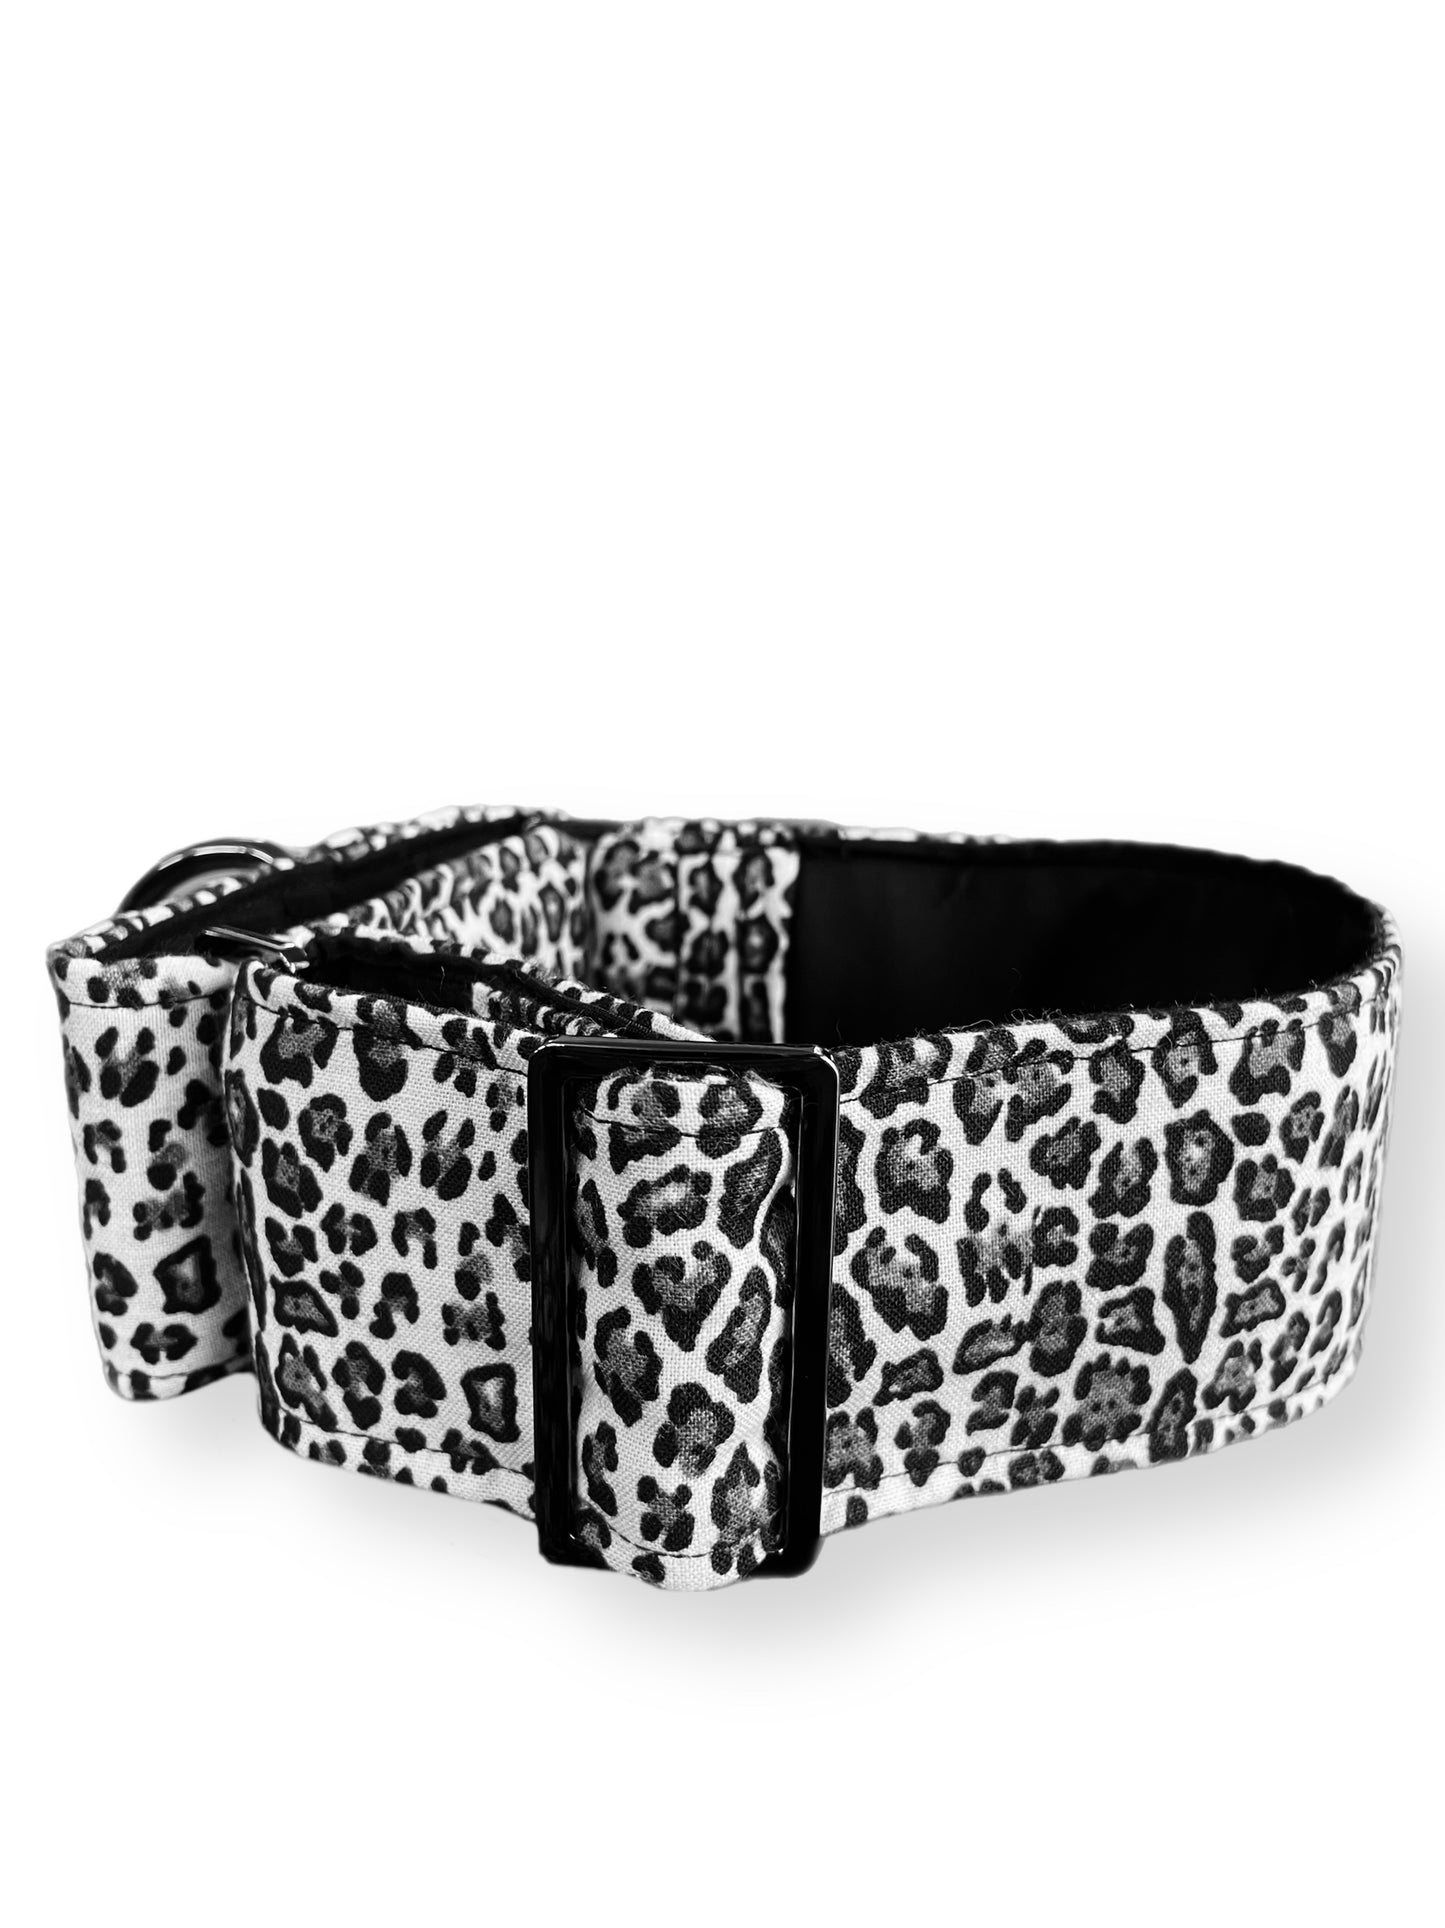 Snow leopard b&w greyhound whippet wide Martingale collar cotton covered super soft